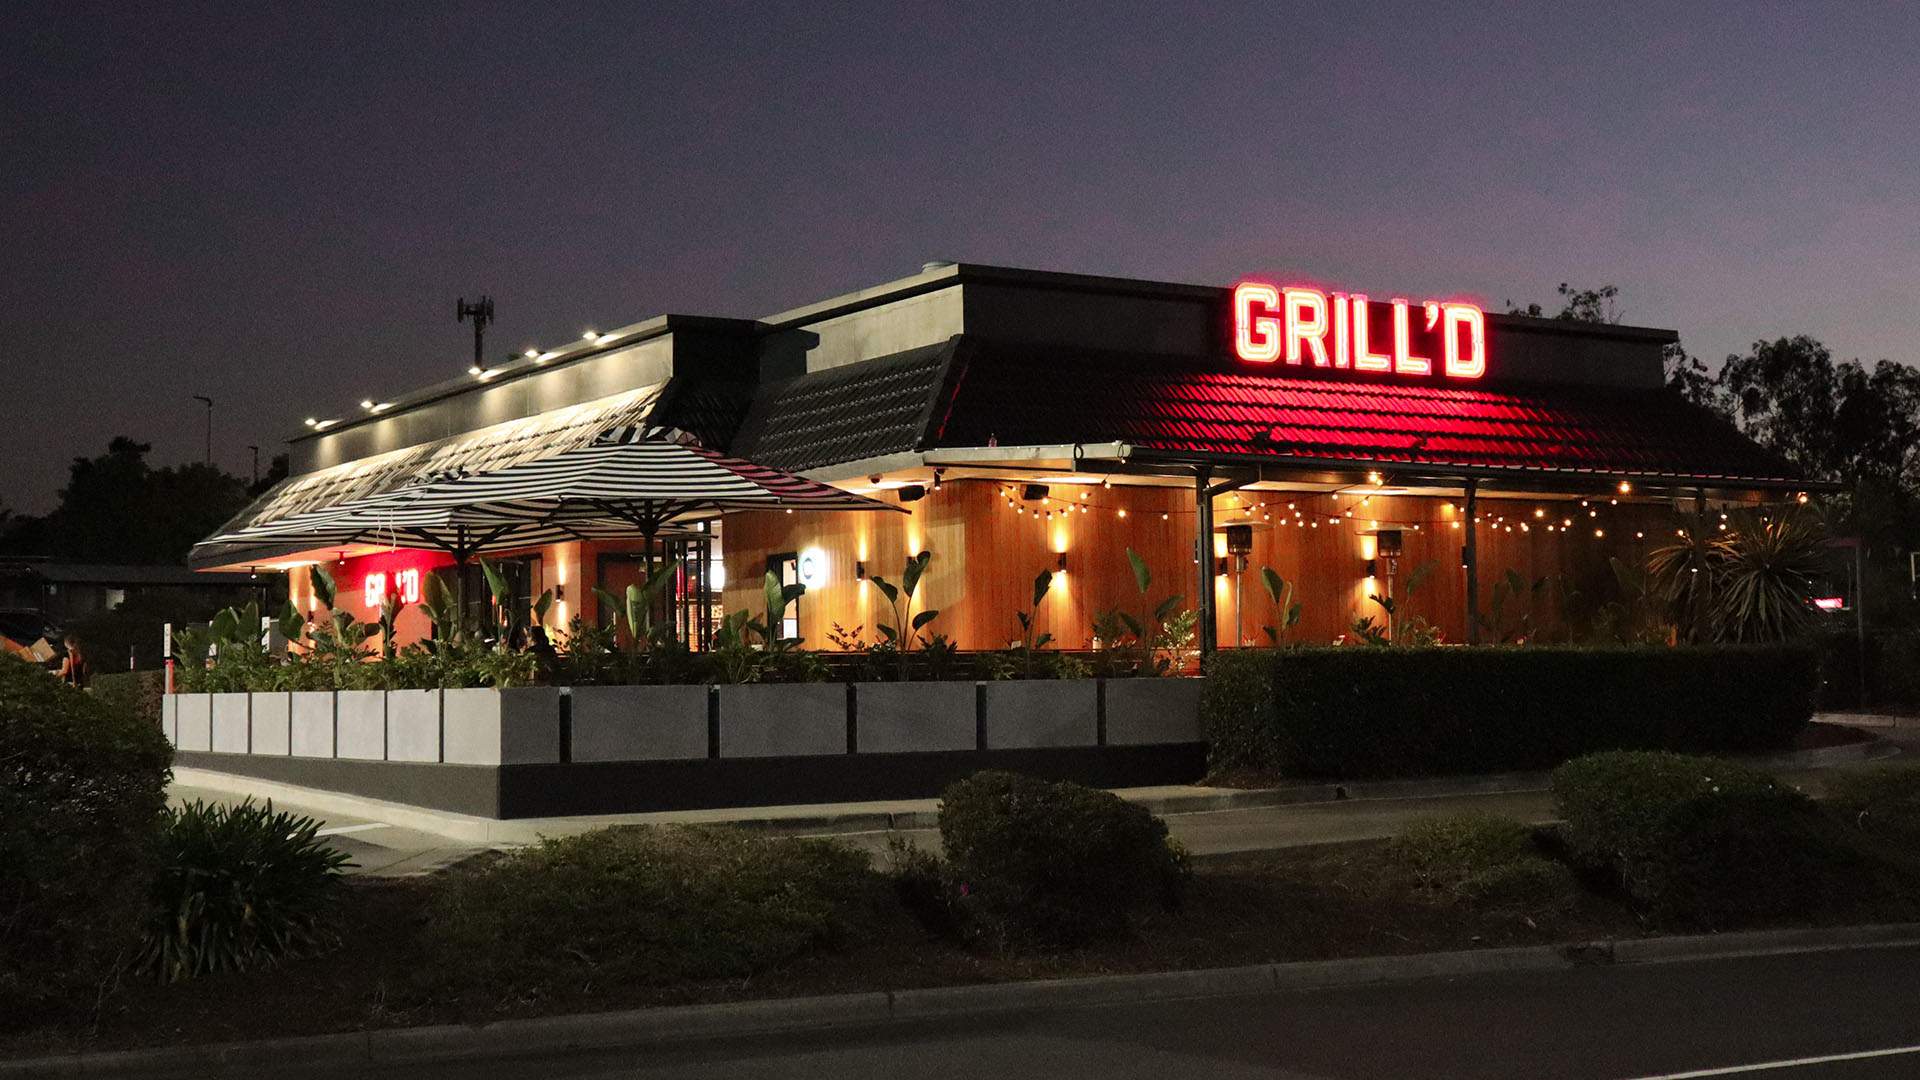 Brisbane's Own Mt Ommaney Is Now Home to Australia's First-Ever Drive-Thru Grill'd